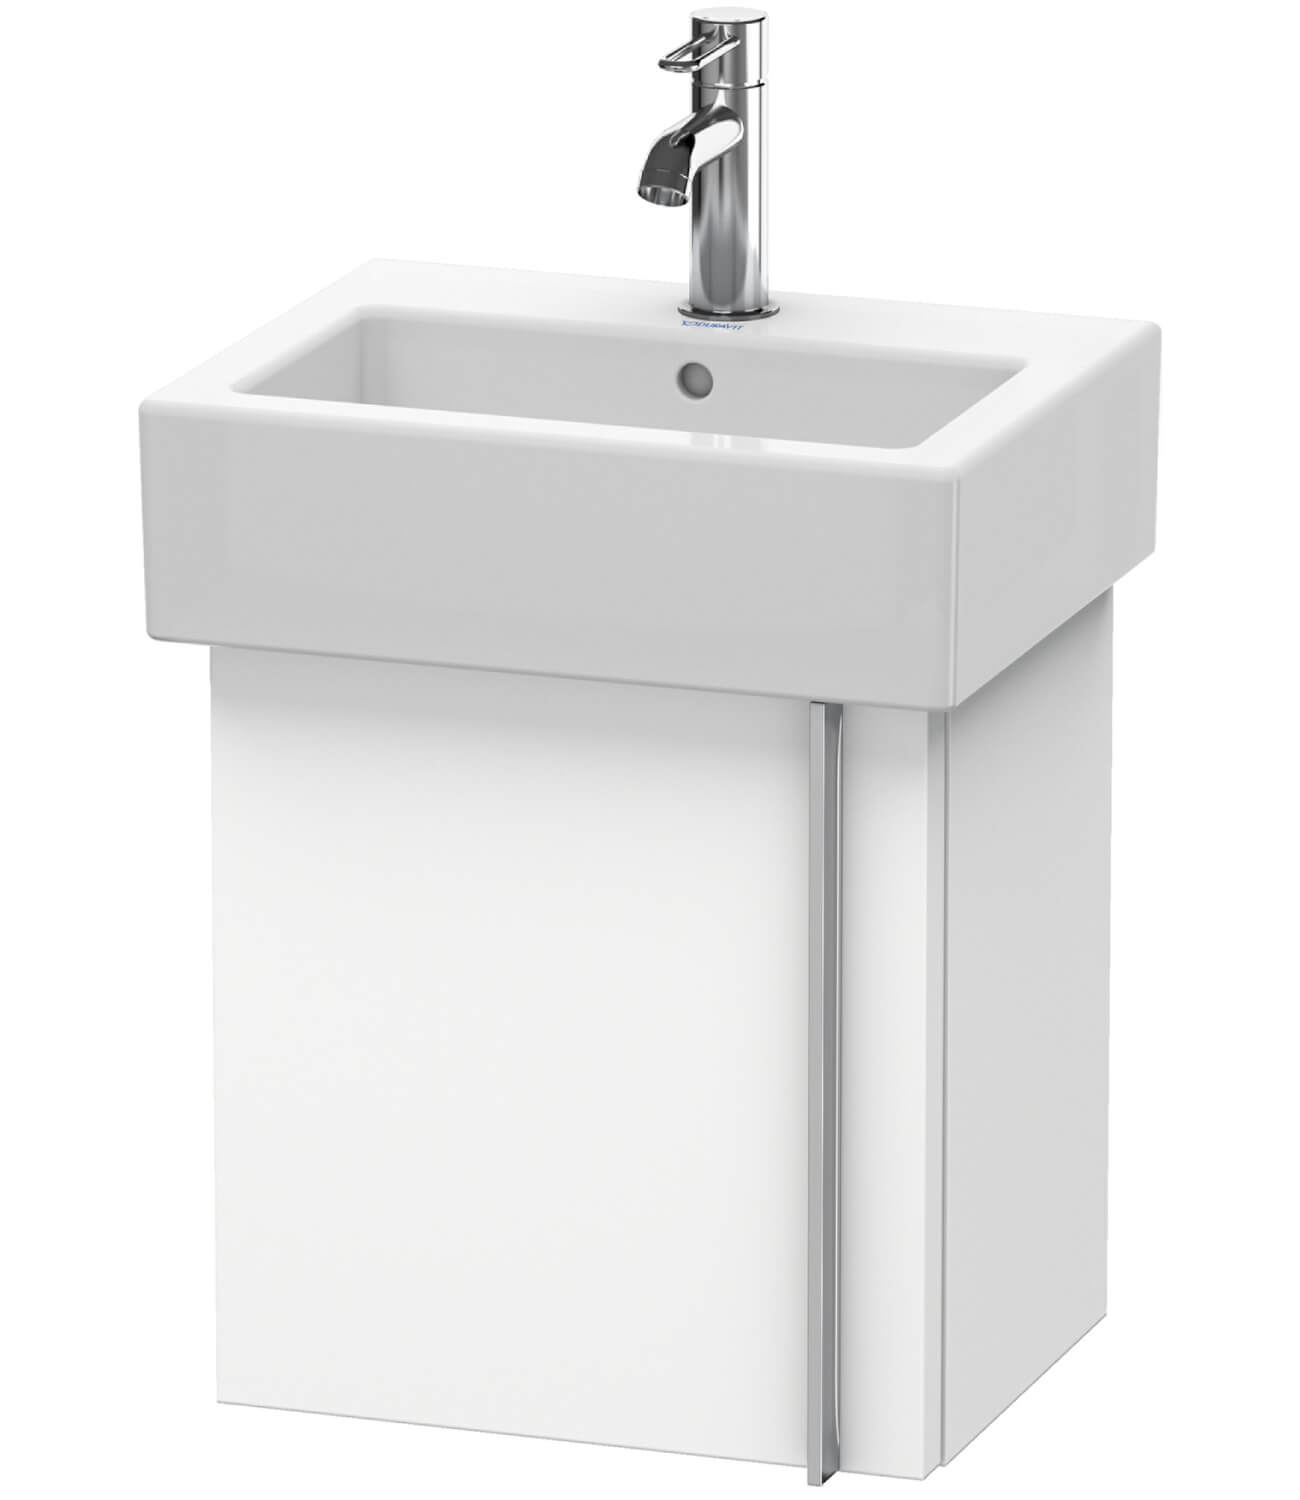 Duravit Vero 400mm Wall Mounted Vanity Unit For Basin